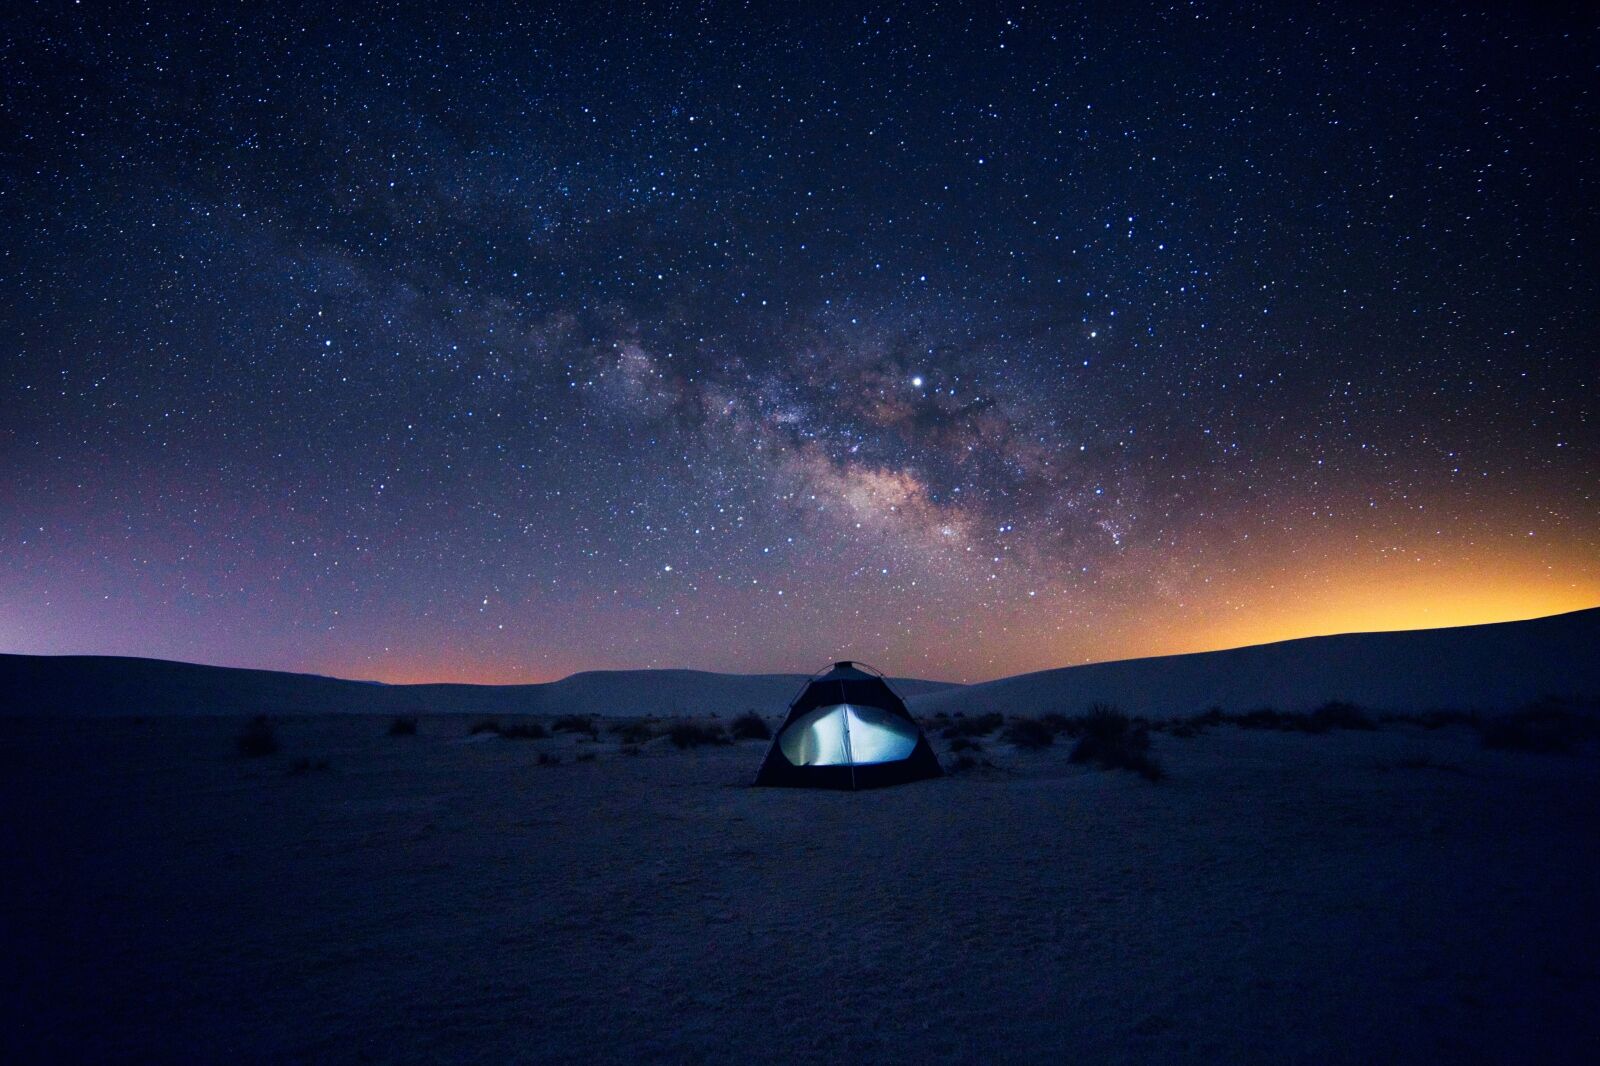 Camping under the Milky Way at White Sands National Monument in New Mexico one of the best dark sky location in the US 